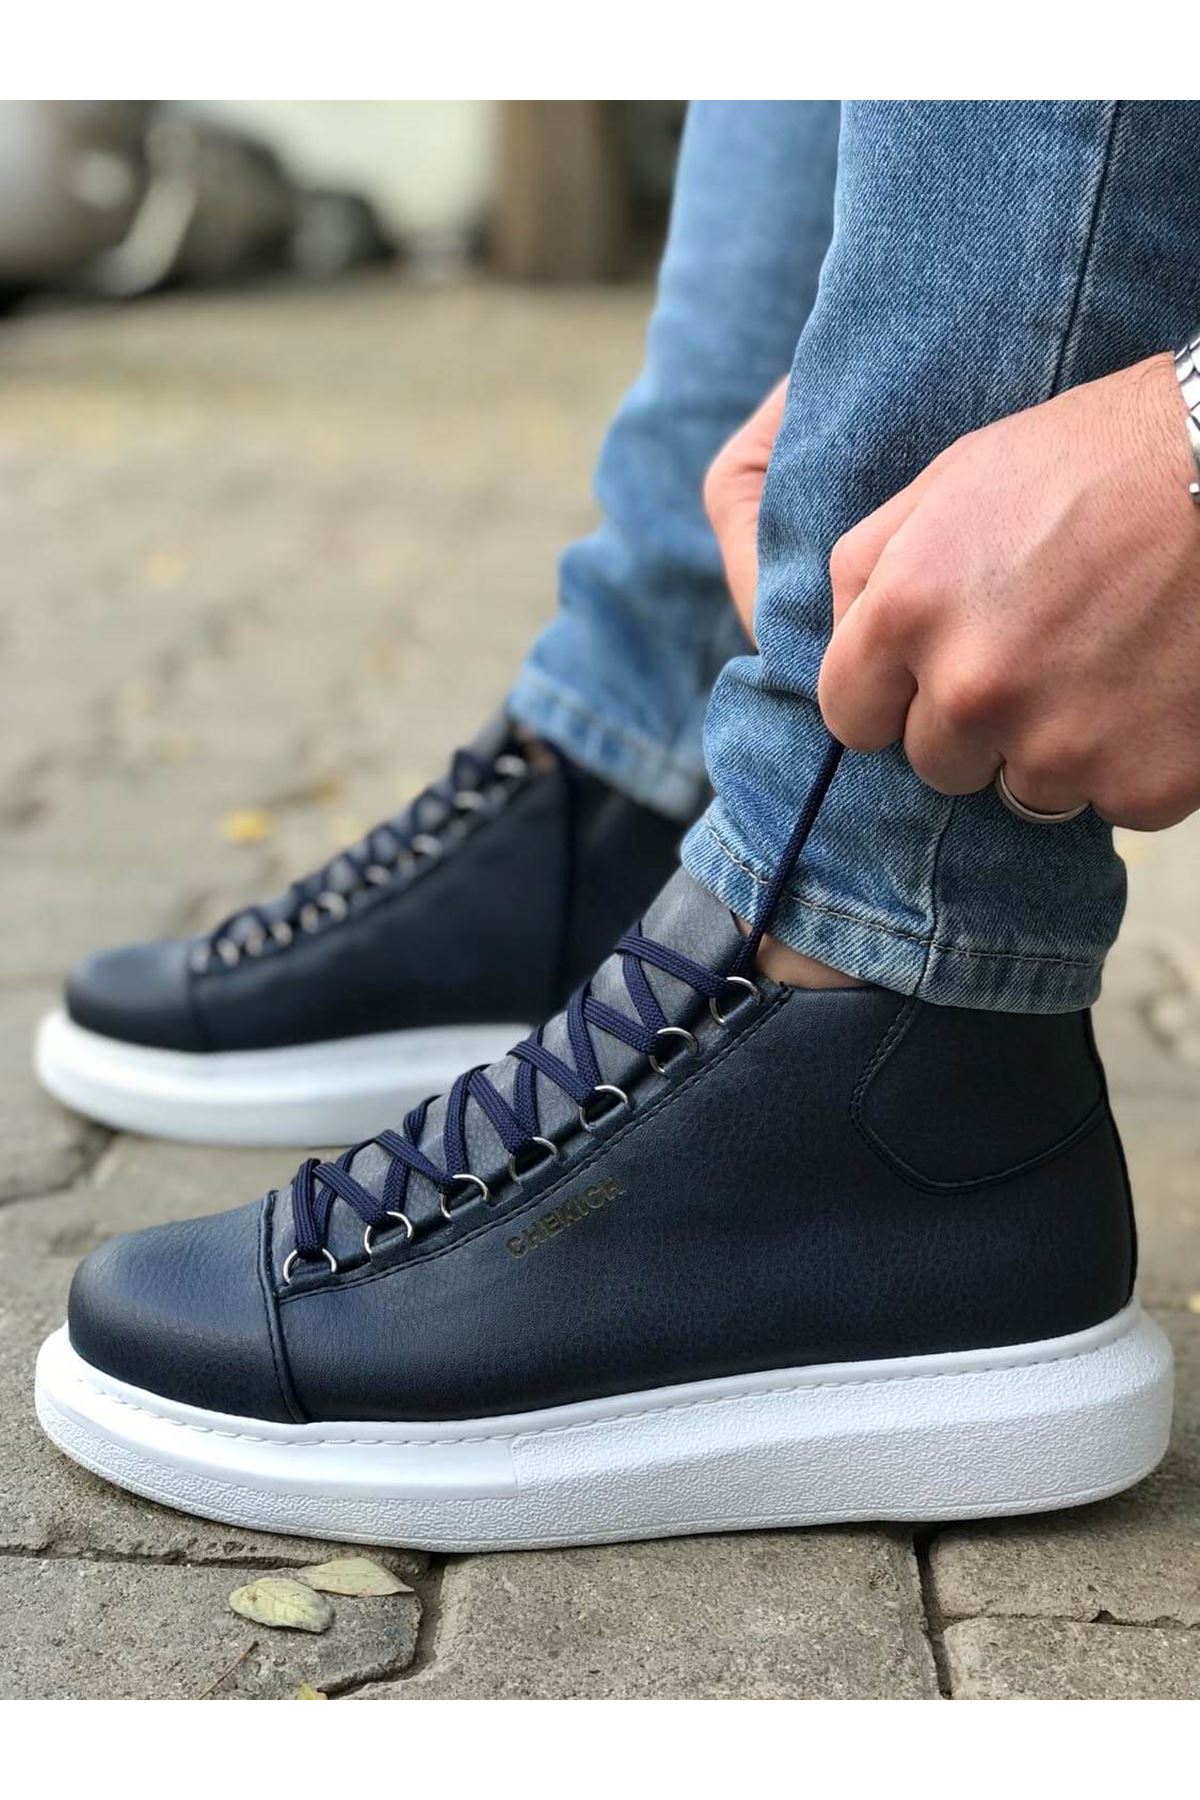 Chekich Men's and Women's Shoes Navy Blue Artificial Leather Winter Fall Seasons Lace Up Sneakers Comfortable Ankle Gentlemens & Ladies Fashion Boots Flexible Footwear Flat Wedding New Trends Travel Plus Size CH258 V4